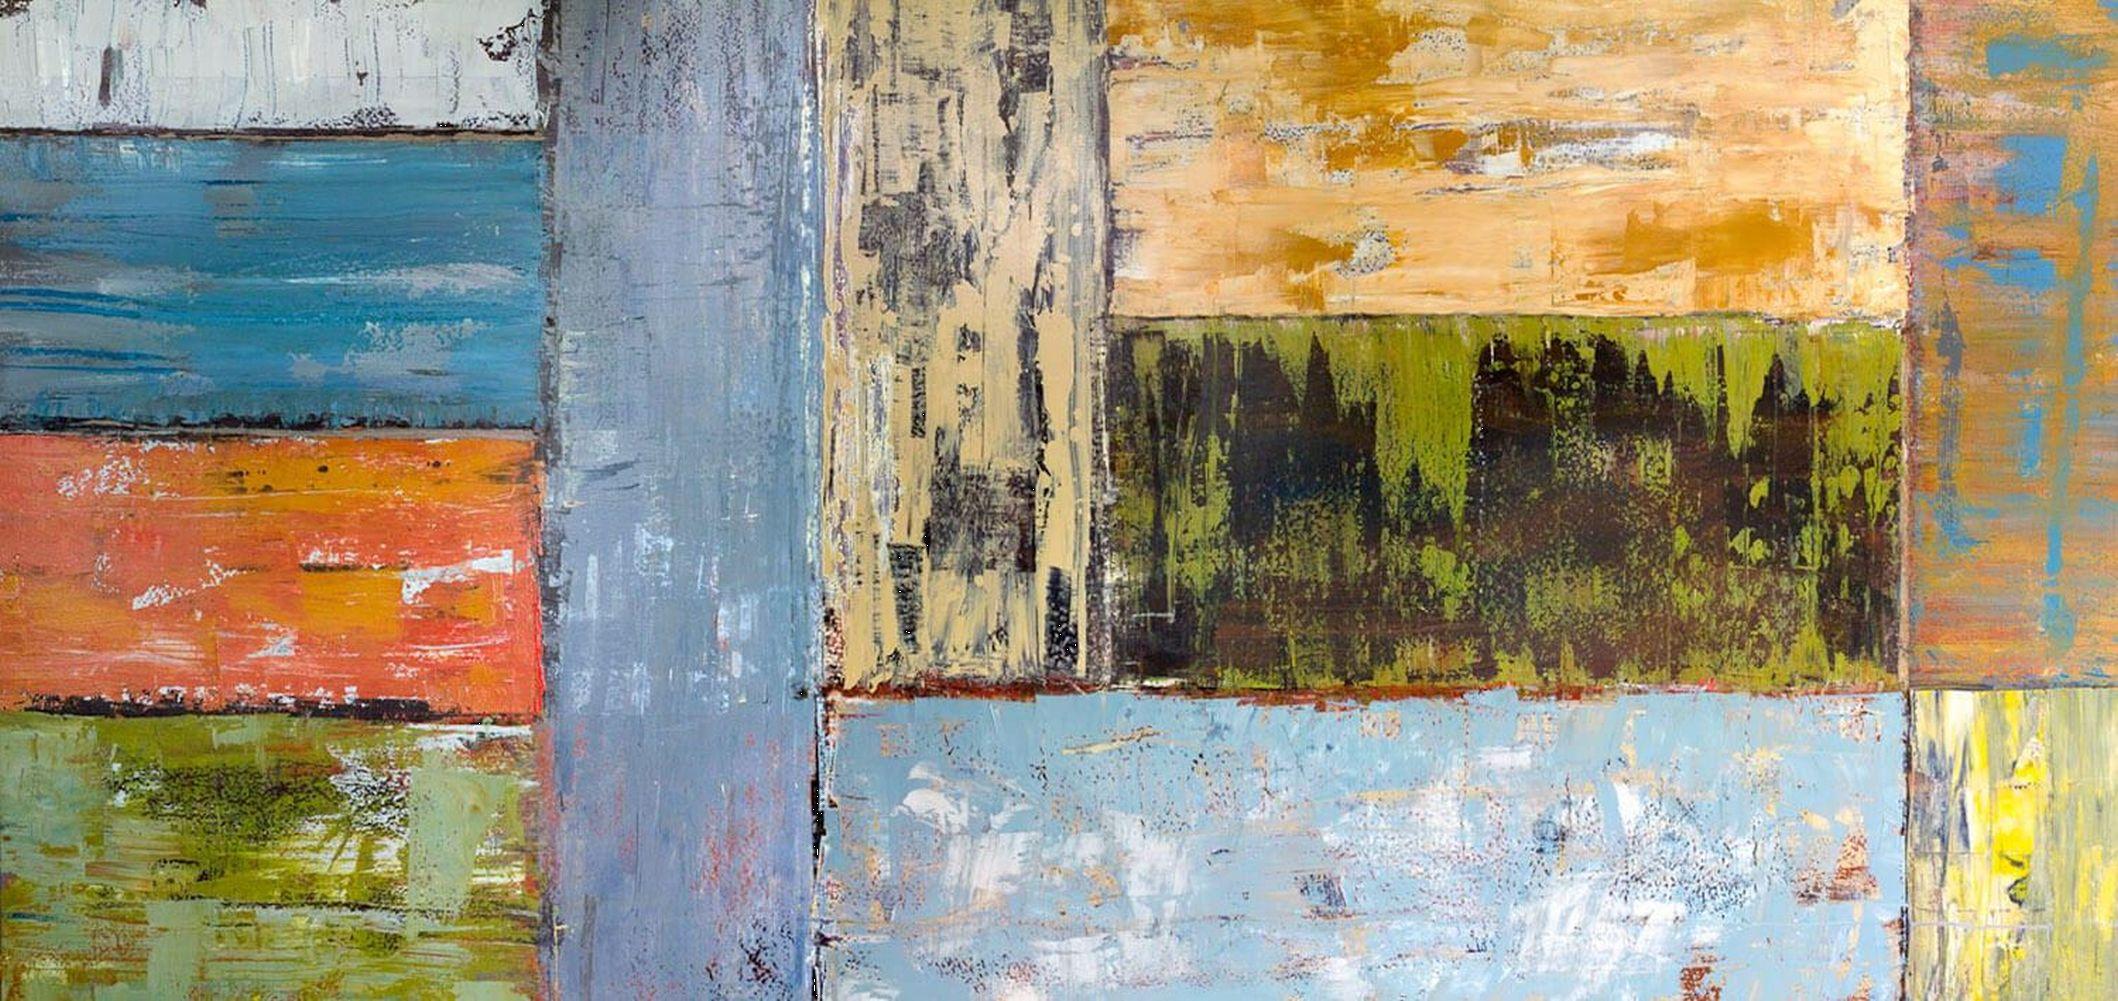 John Beard Abstract Painting - SPACES, Contemporary Fine Art on Giclee Canvas: 72"H x 36"W